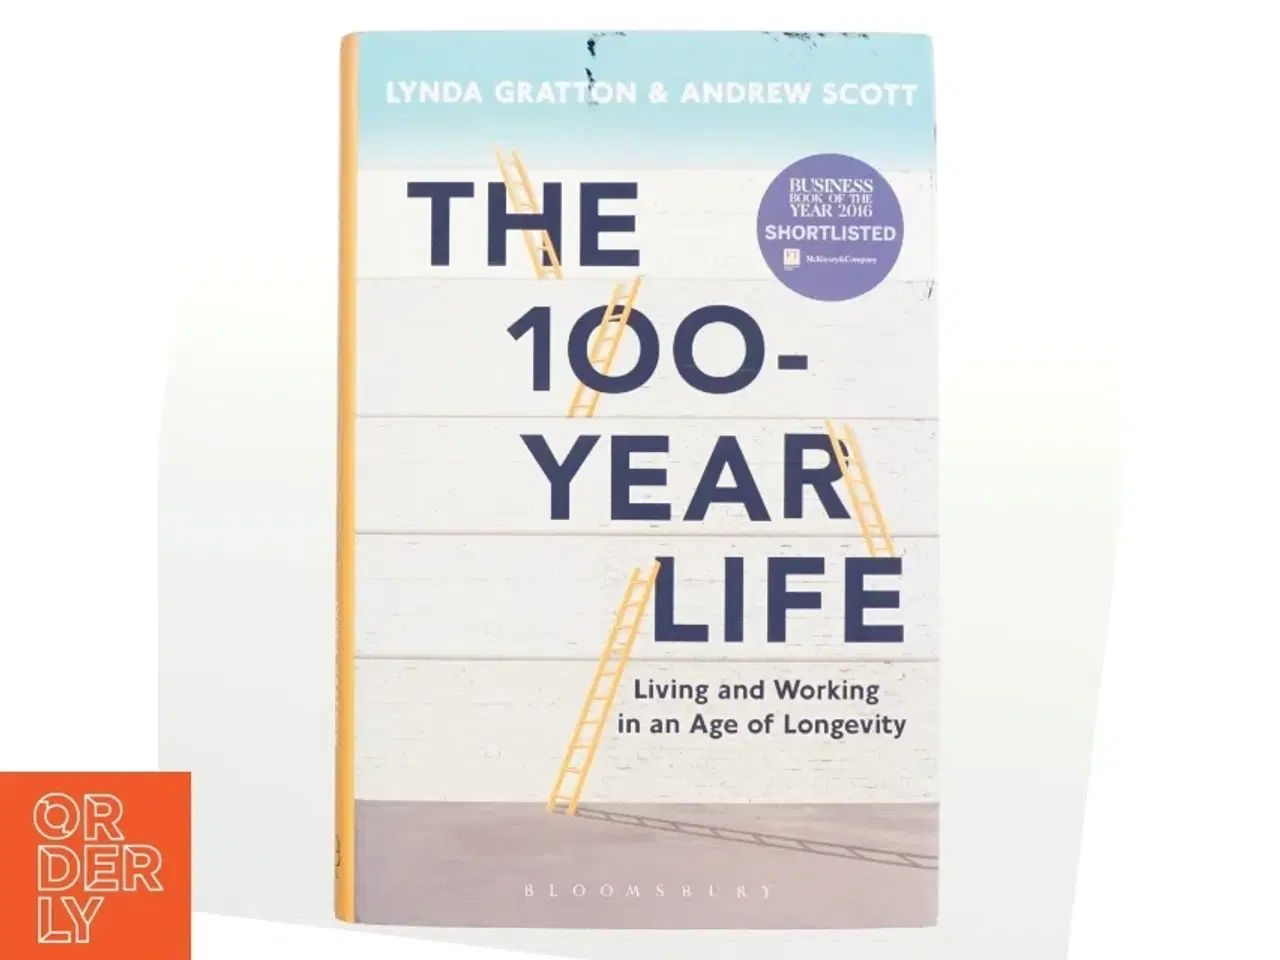 Billede 1 - The 100-year life : living and working in an age of longevity af Lynda Gratton (Bog)